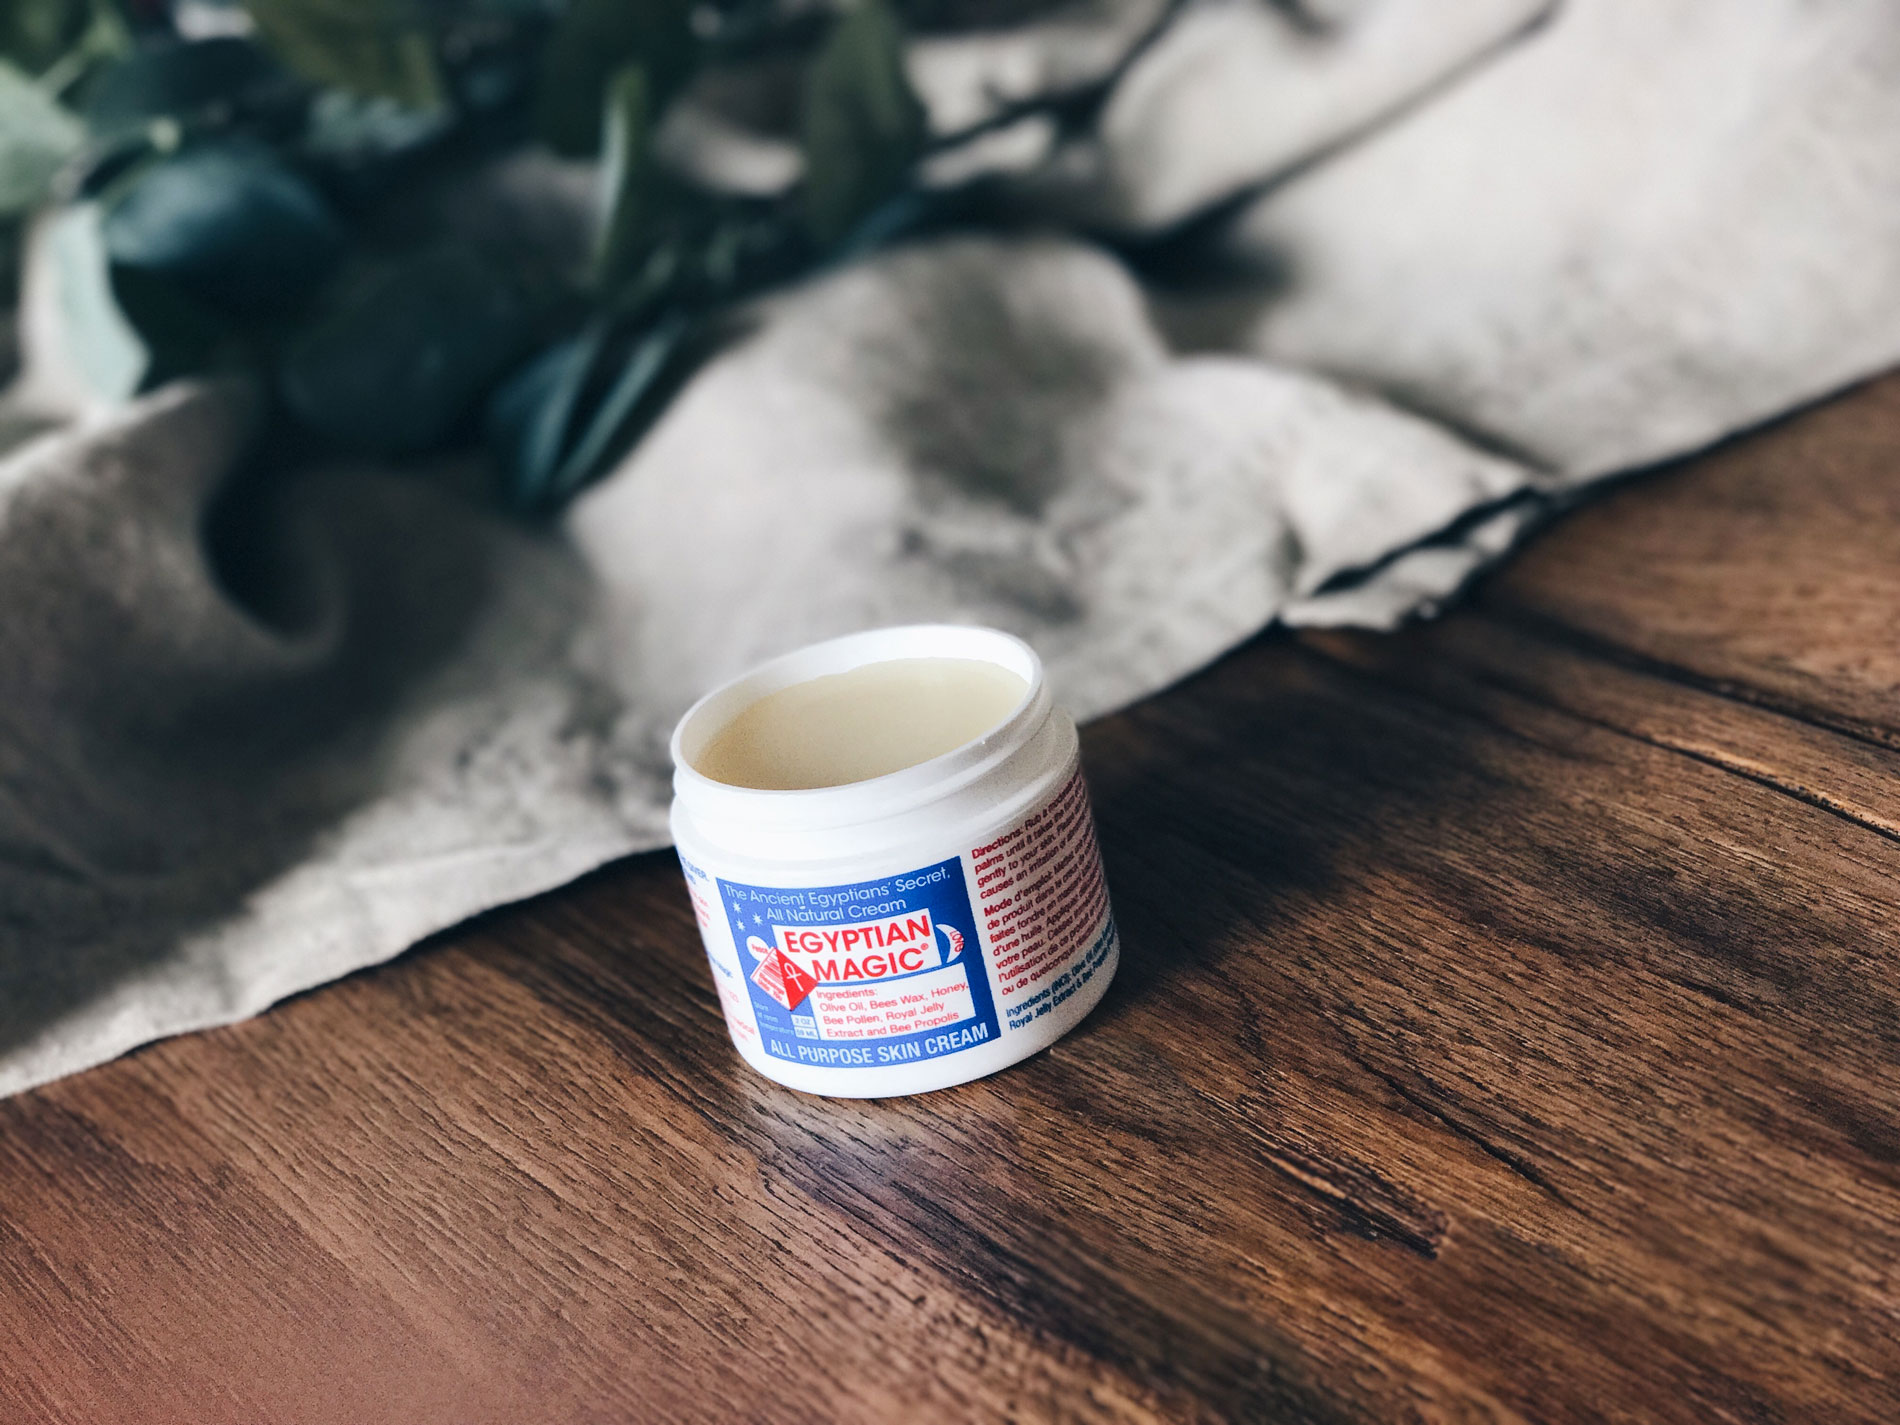 A cream that can deeply moisturize and heal every type of skin. It's magic